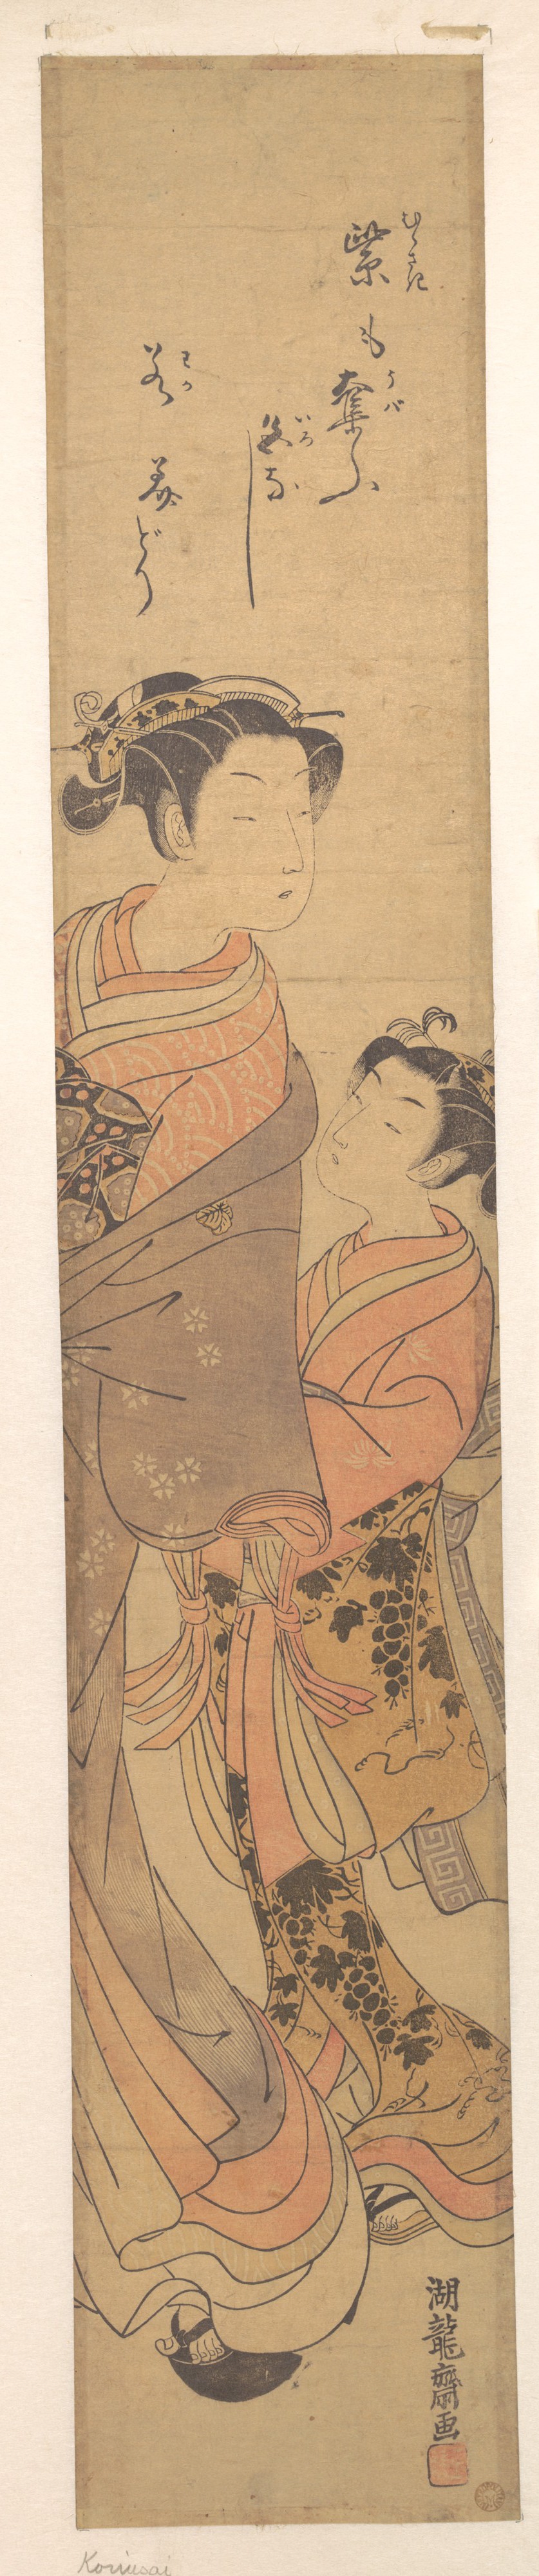 Isoda Koryūsai Artworks collected in Metmuseum